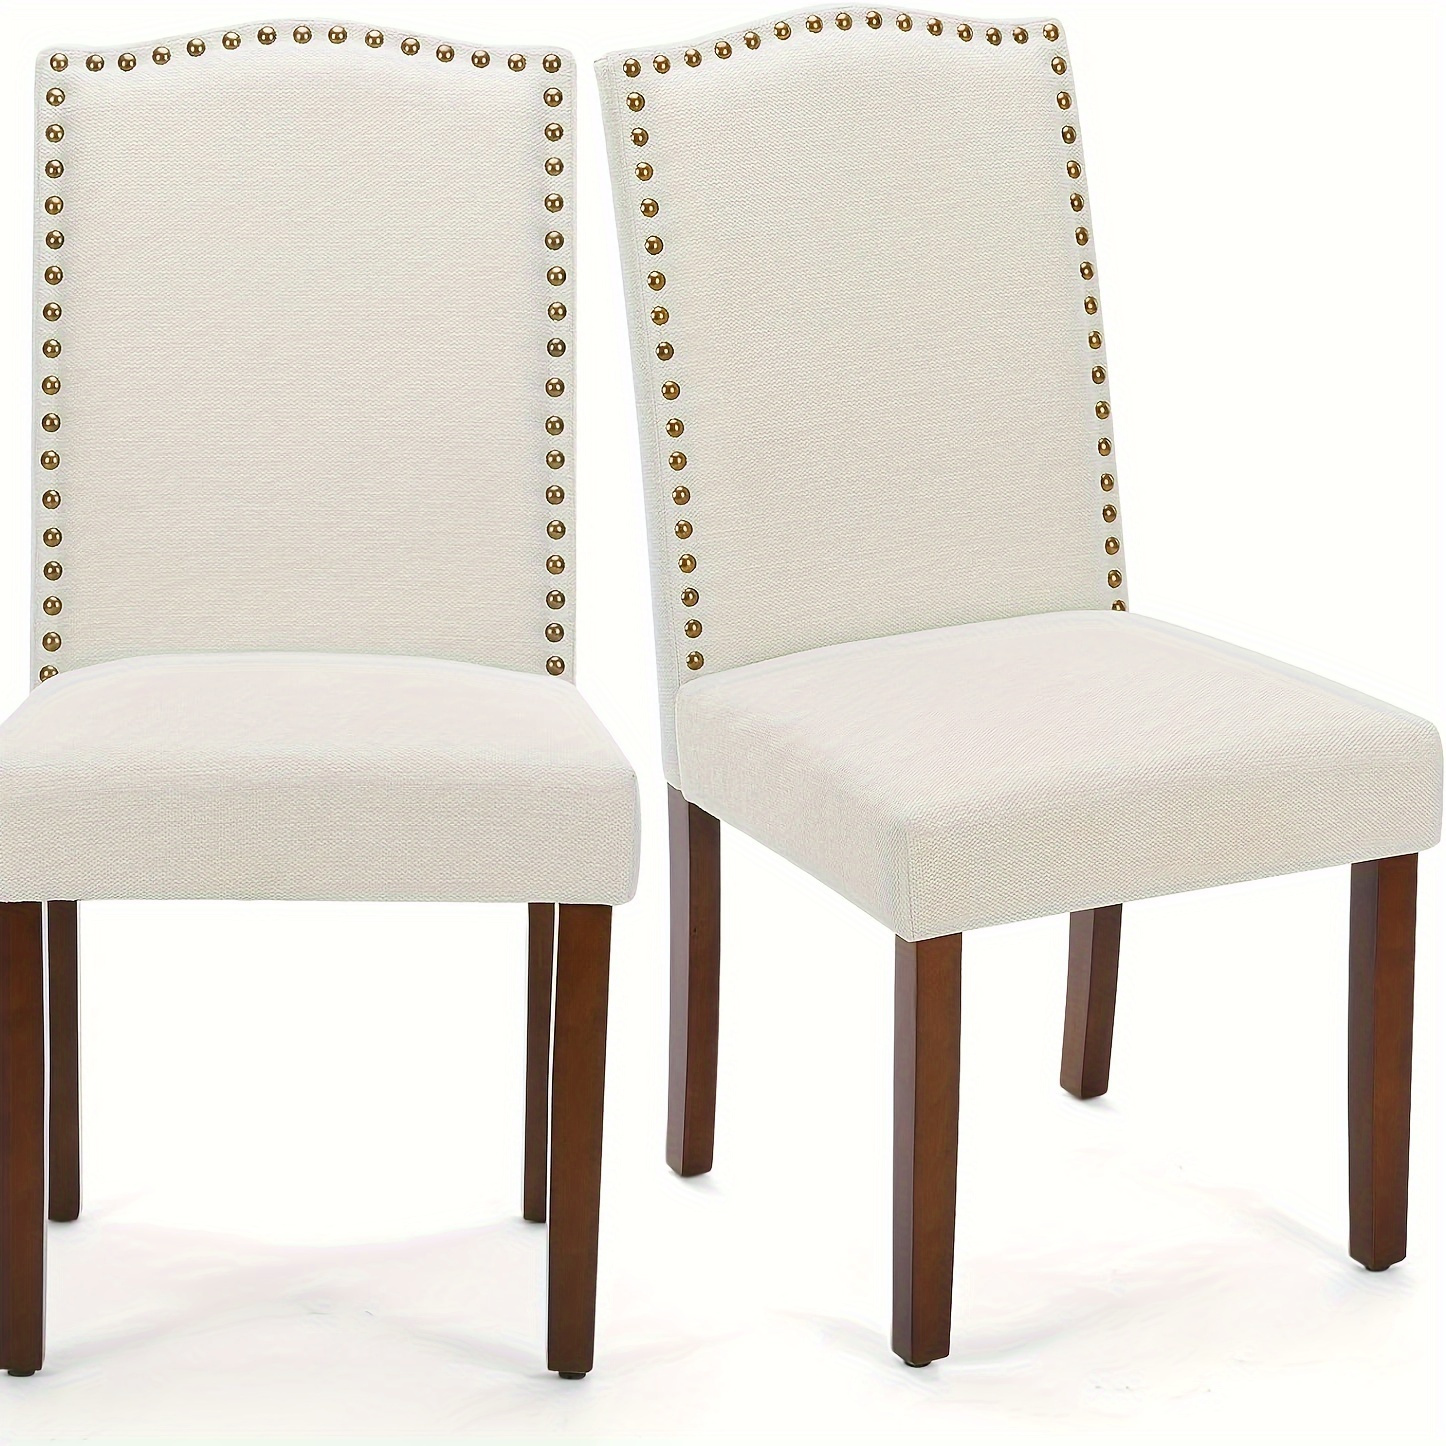 

Dining Chairs, Modern Upholstered Fabric Dining Room Chair With Wood Legs And Nailhead Trim, Mid-century Accent Dinner Chair For Kitchen, Living Room